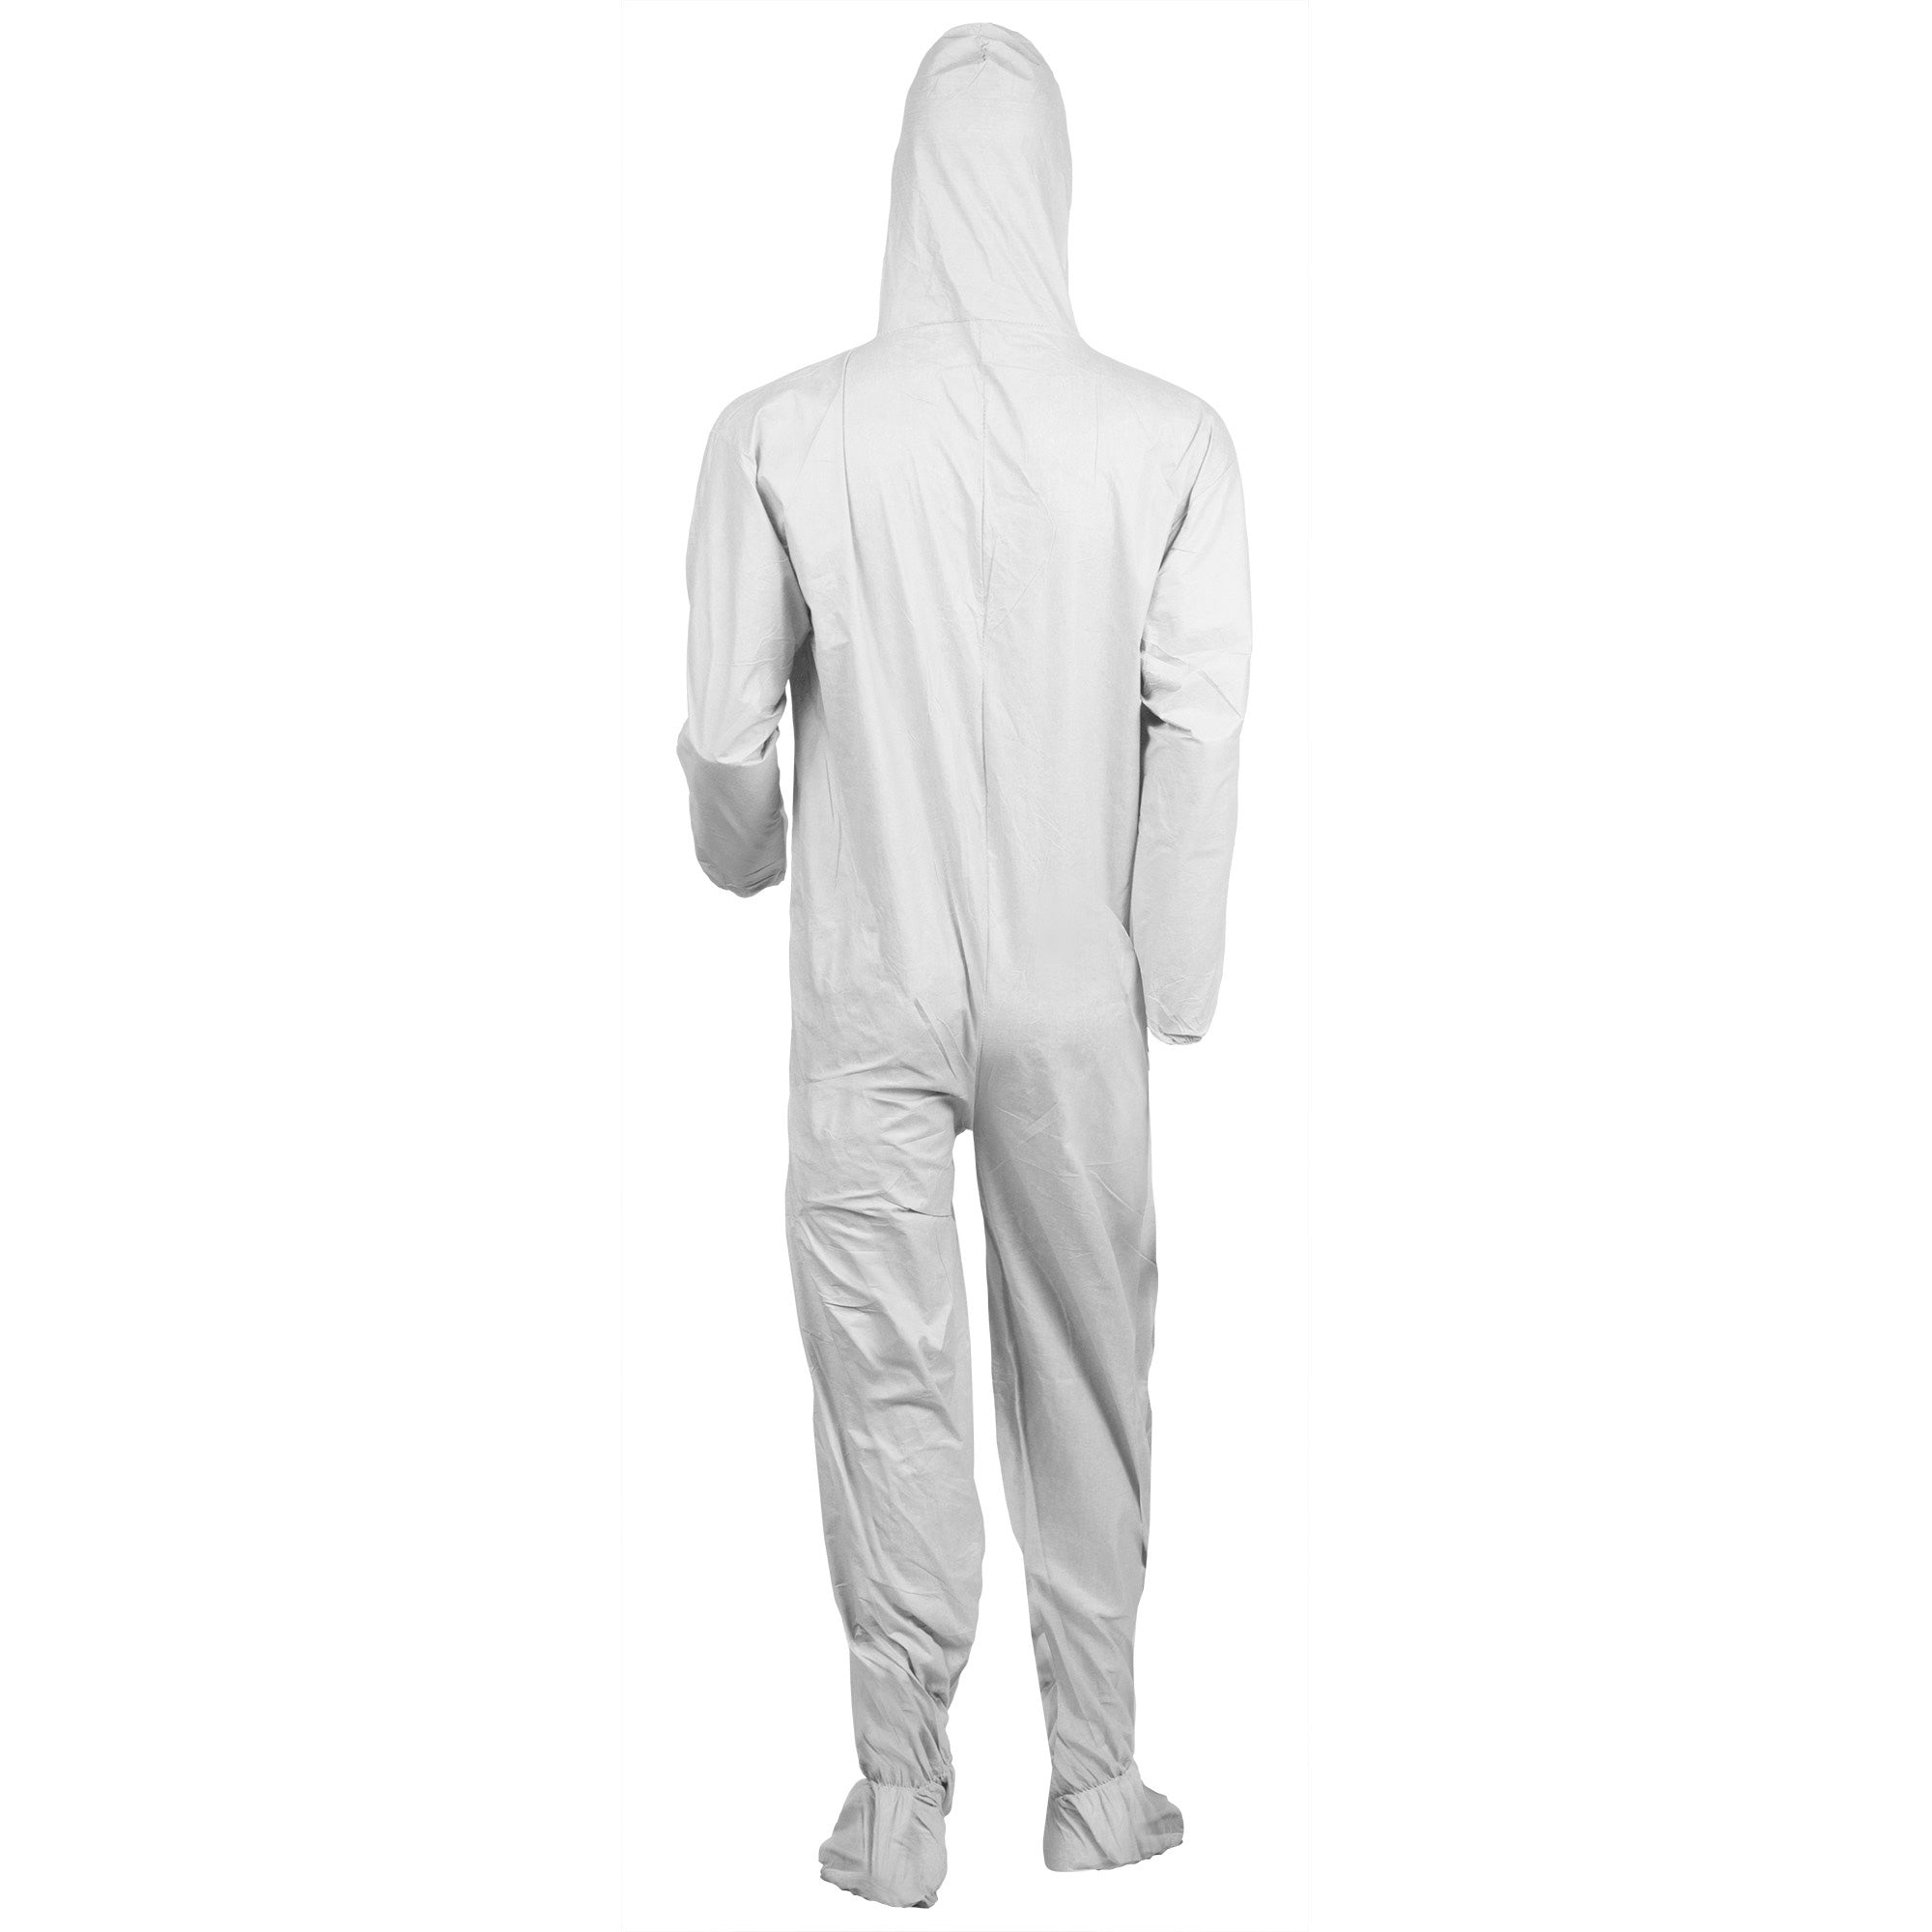 Kleenguard A40 Coveralls - Zipper Front, Elastic Wrists, Ankles, Hood & Boots - Medium Size - Liquid, Flying Particle Protection - White - Hood, Zipper Front, Elastic Wrist, Elastic Ankle, Breathable, Low Linting - 25 / Carton - 